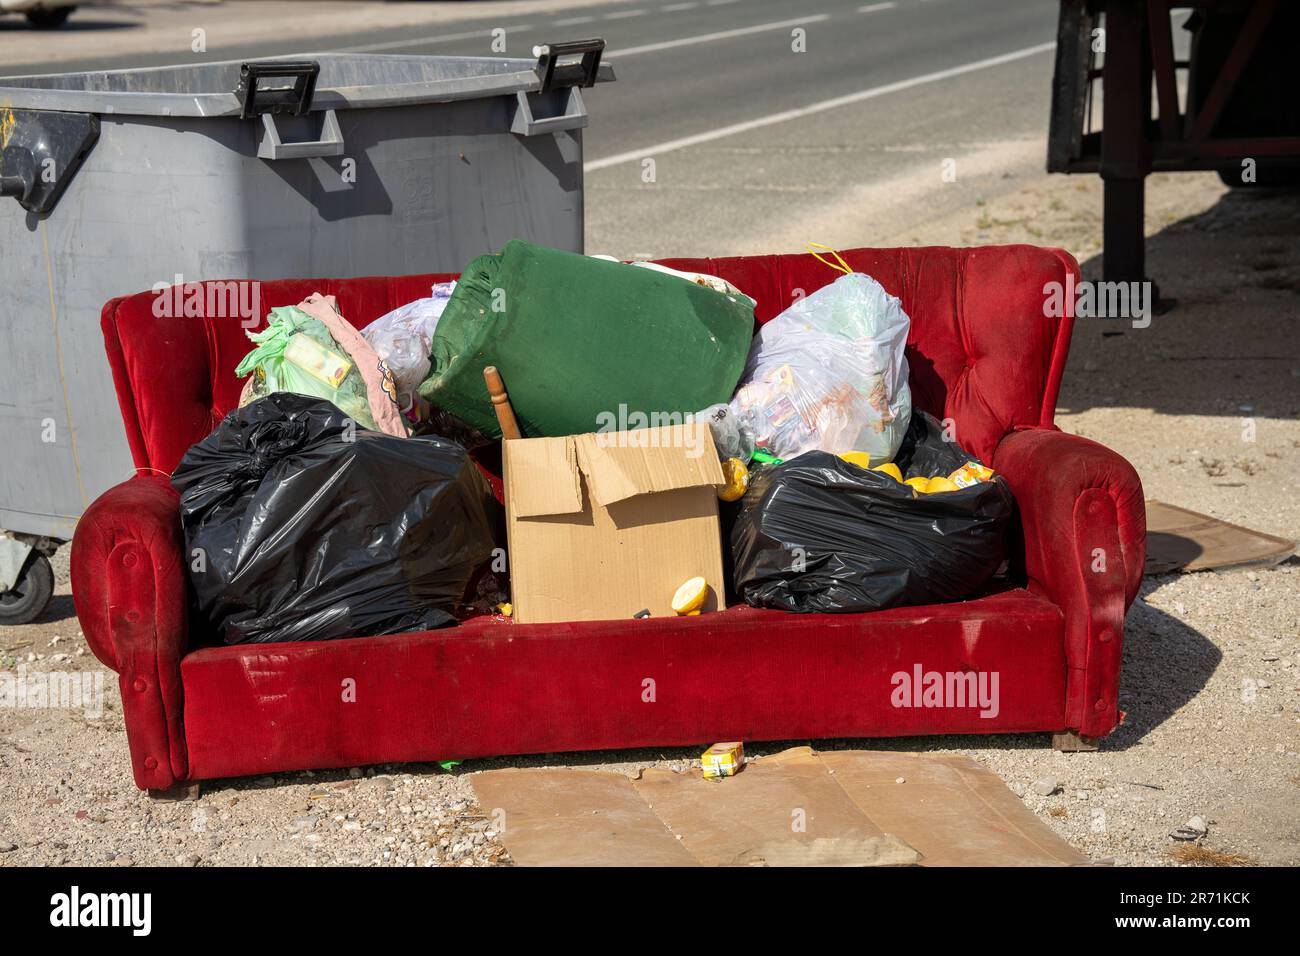 Sofa full of garbage bags and boxes Stock Photo